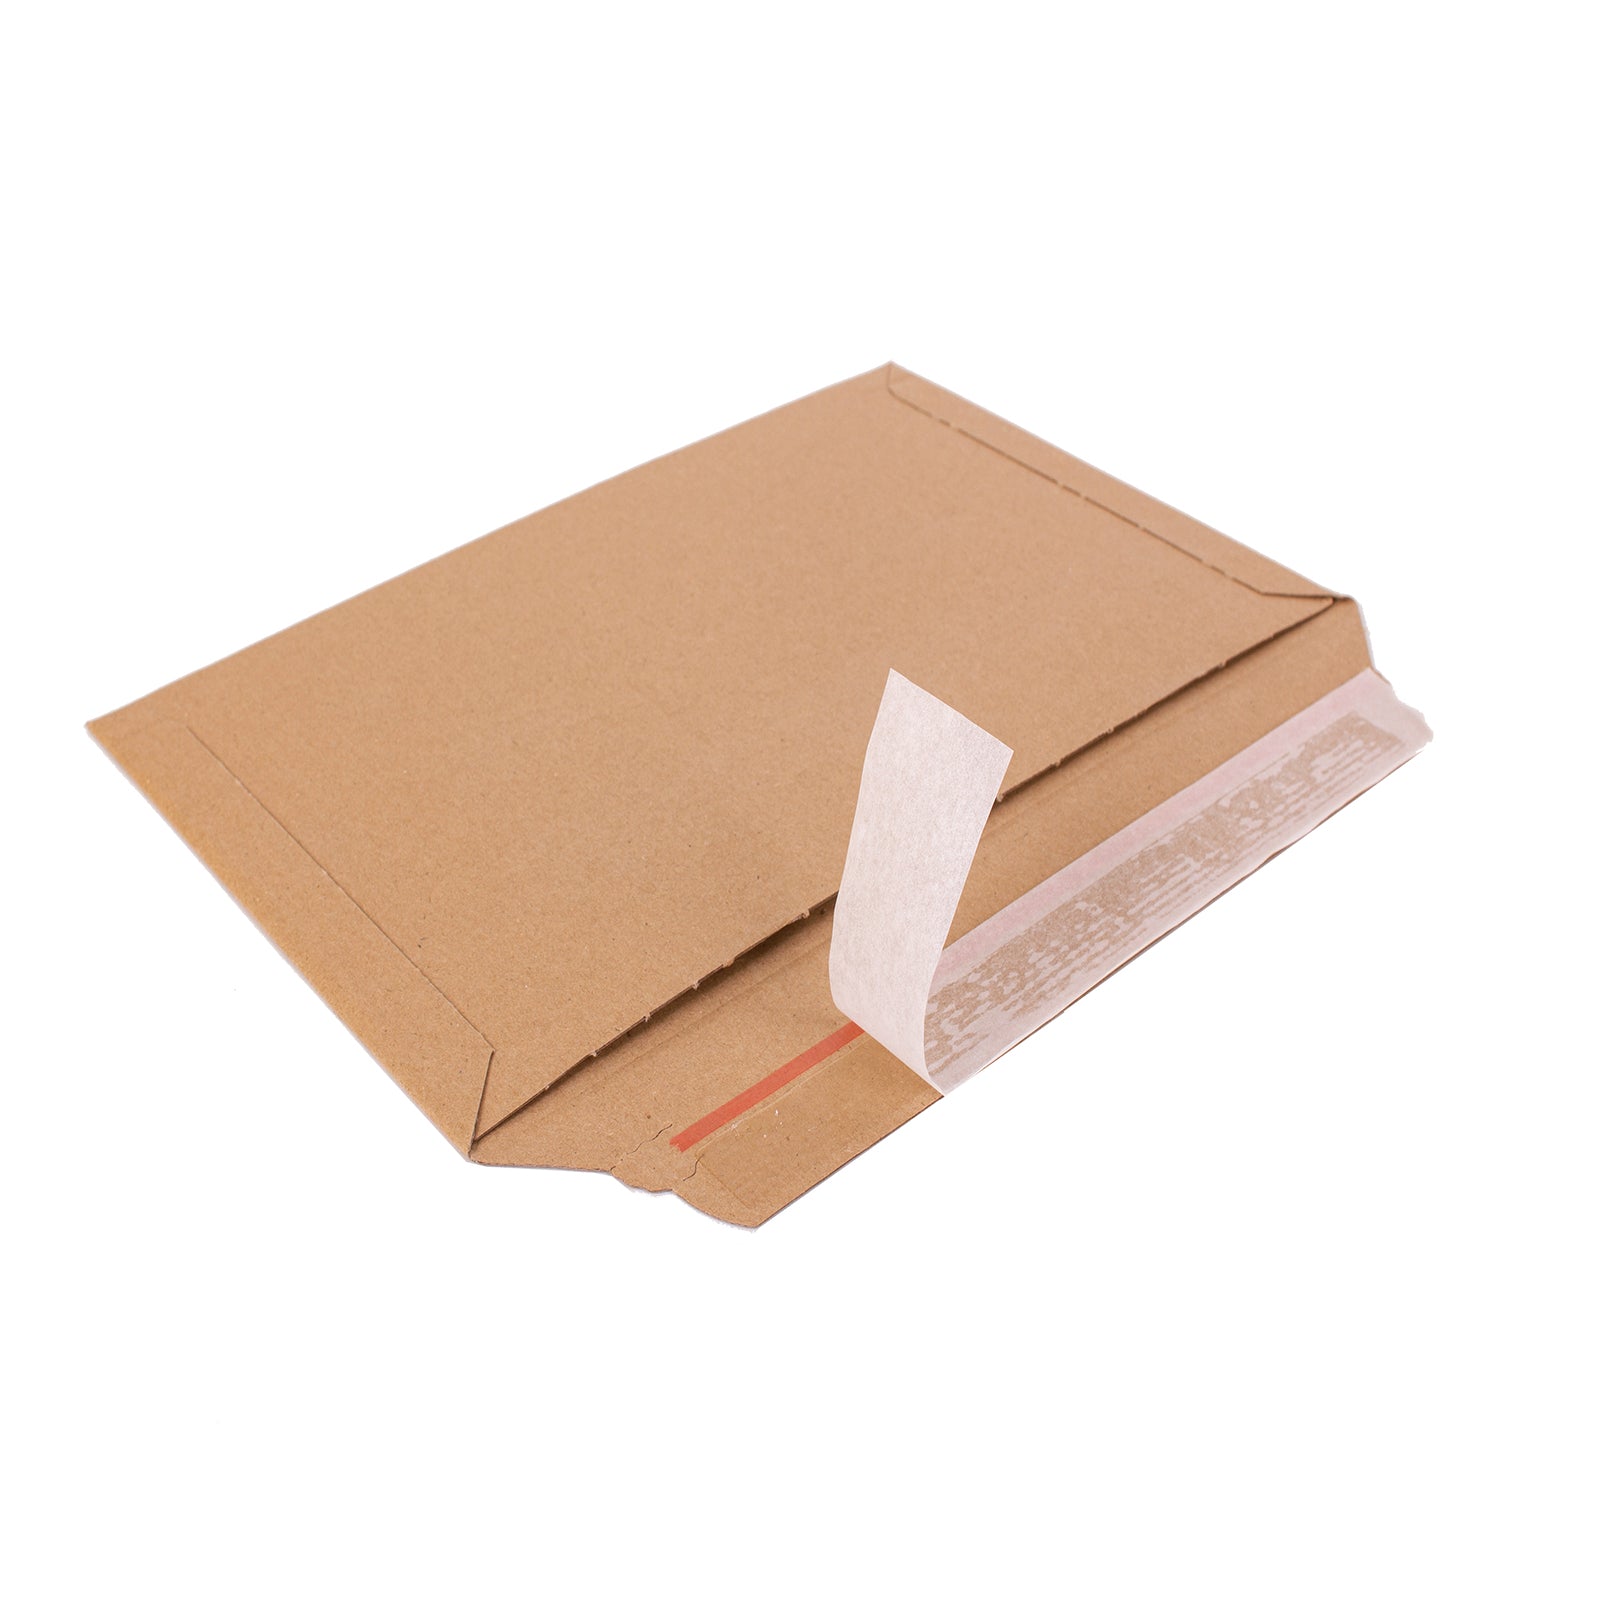 Expandable / Capacity Envelope C5L | SR Mailing | Sustainable eCommerce Packaging